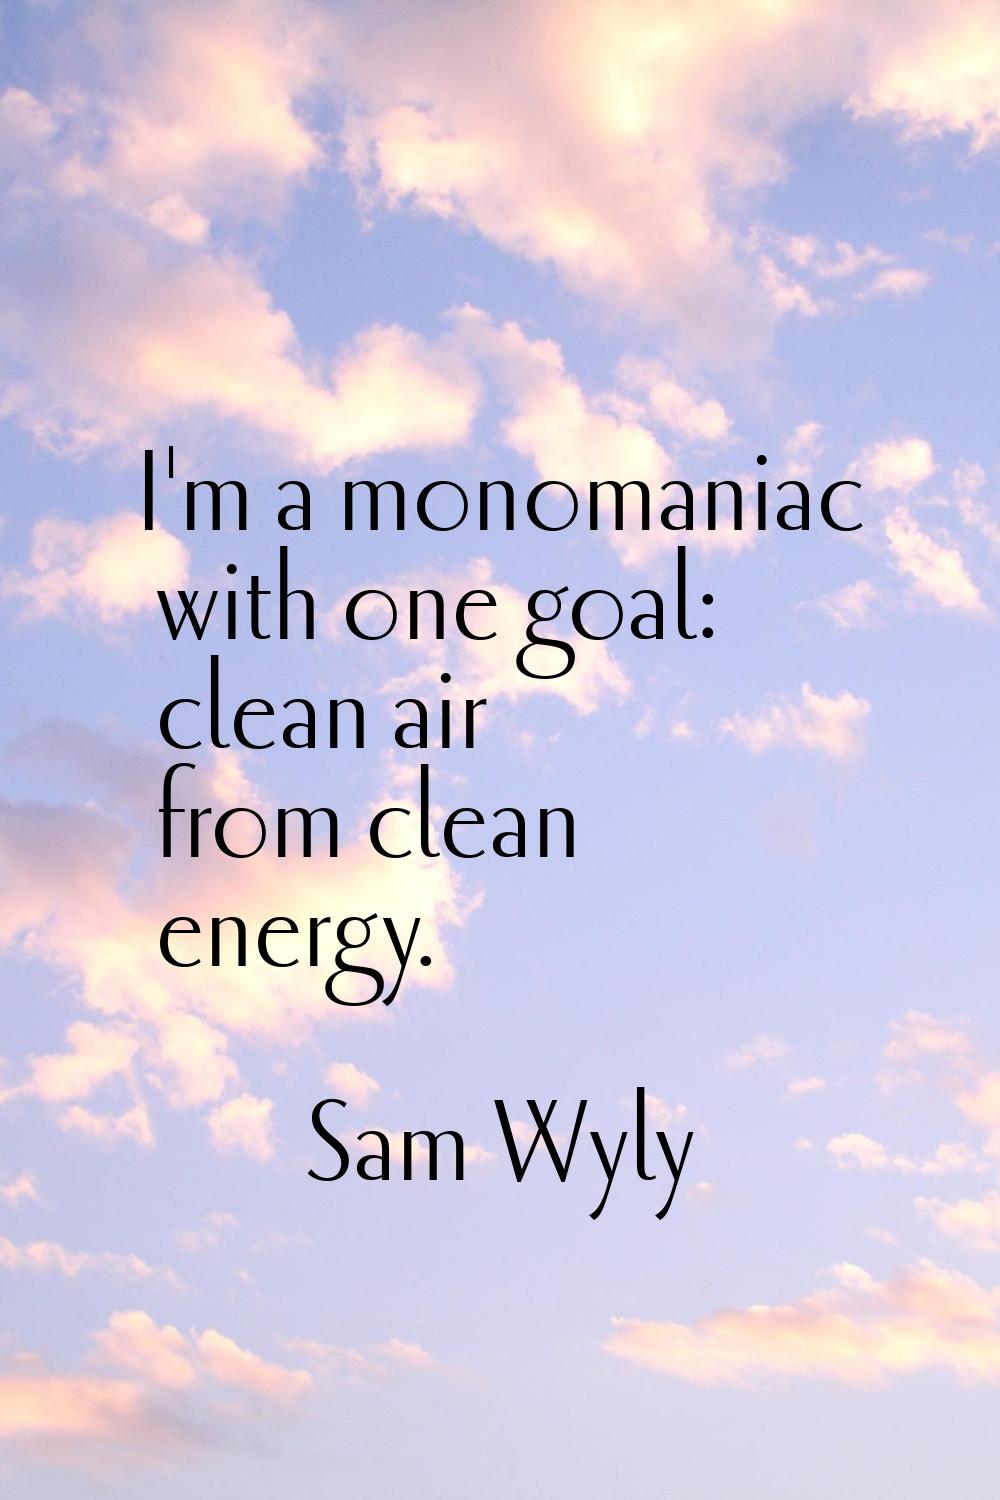 I'm a monomaniac with one goal: clean air from clean energy.